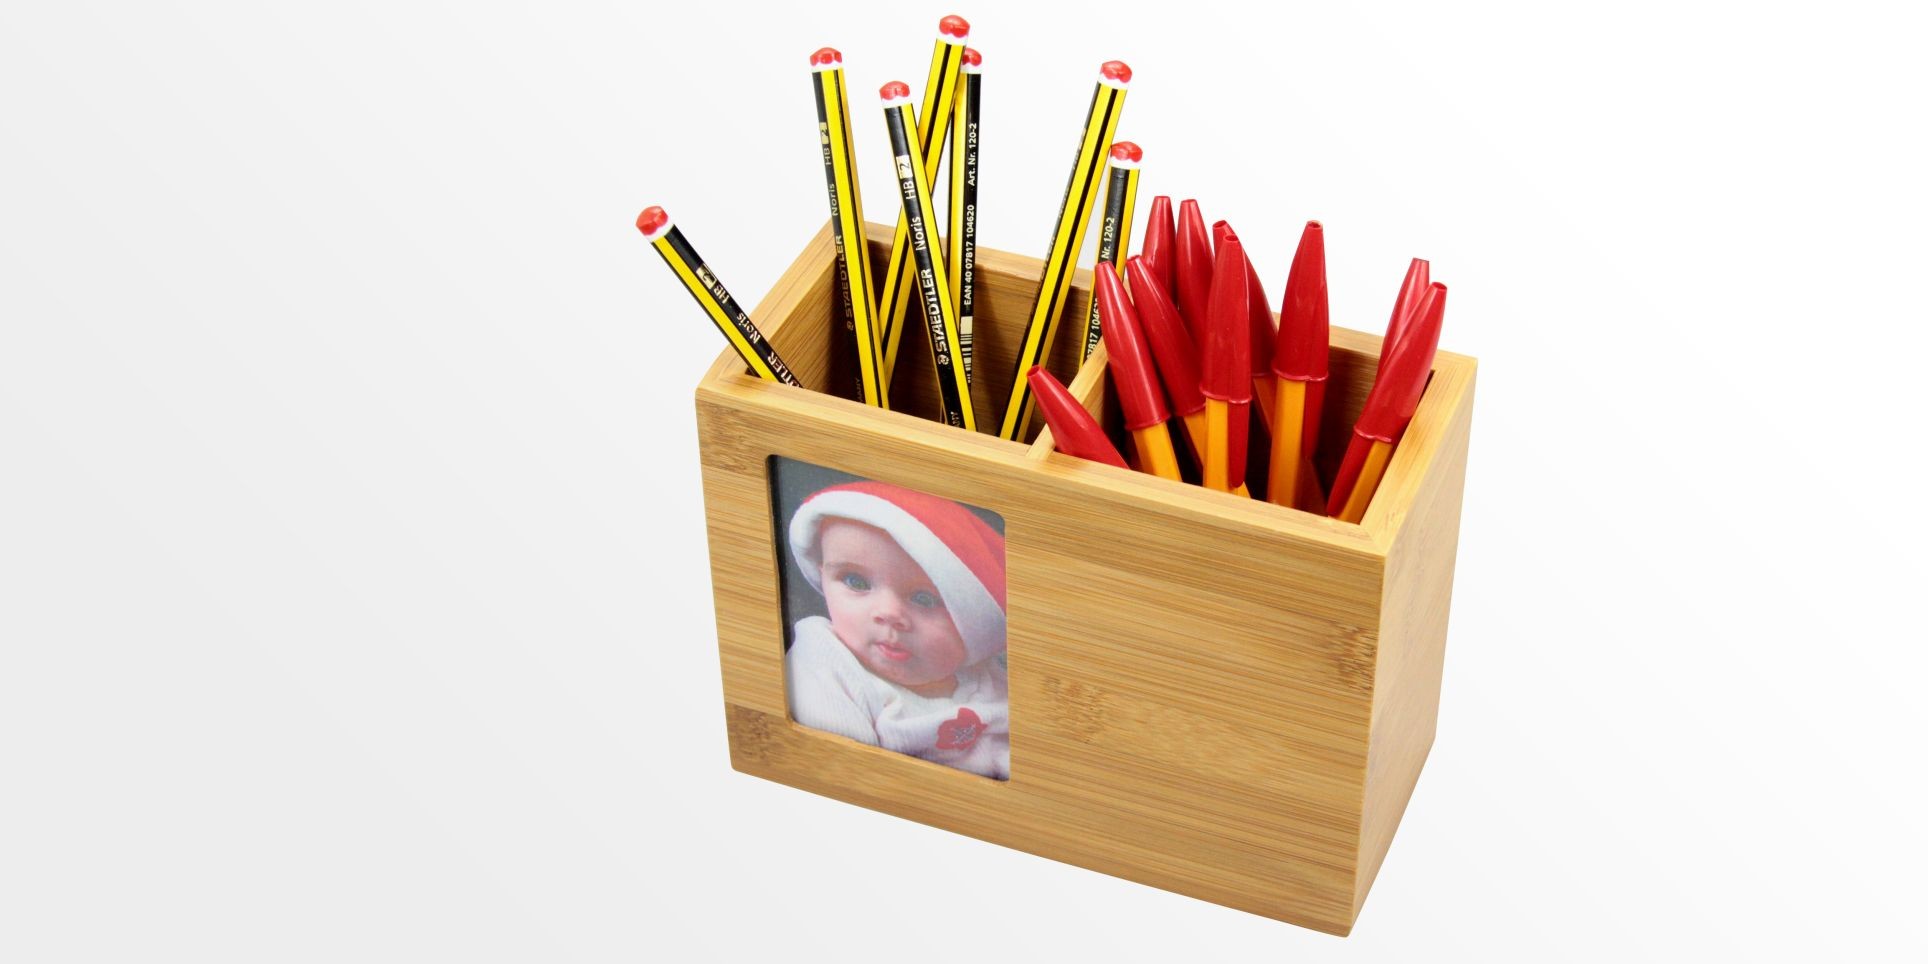 Bamboo Pen Holder with Photo